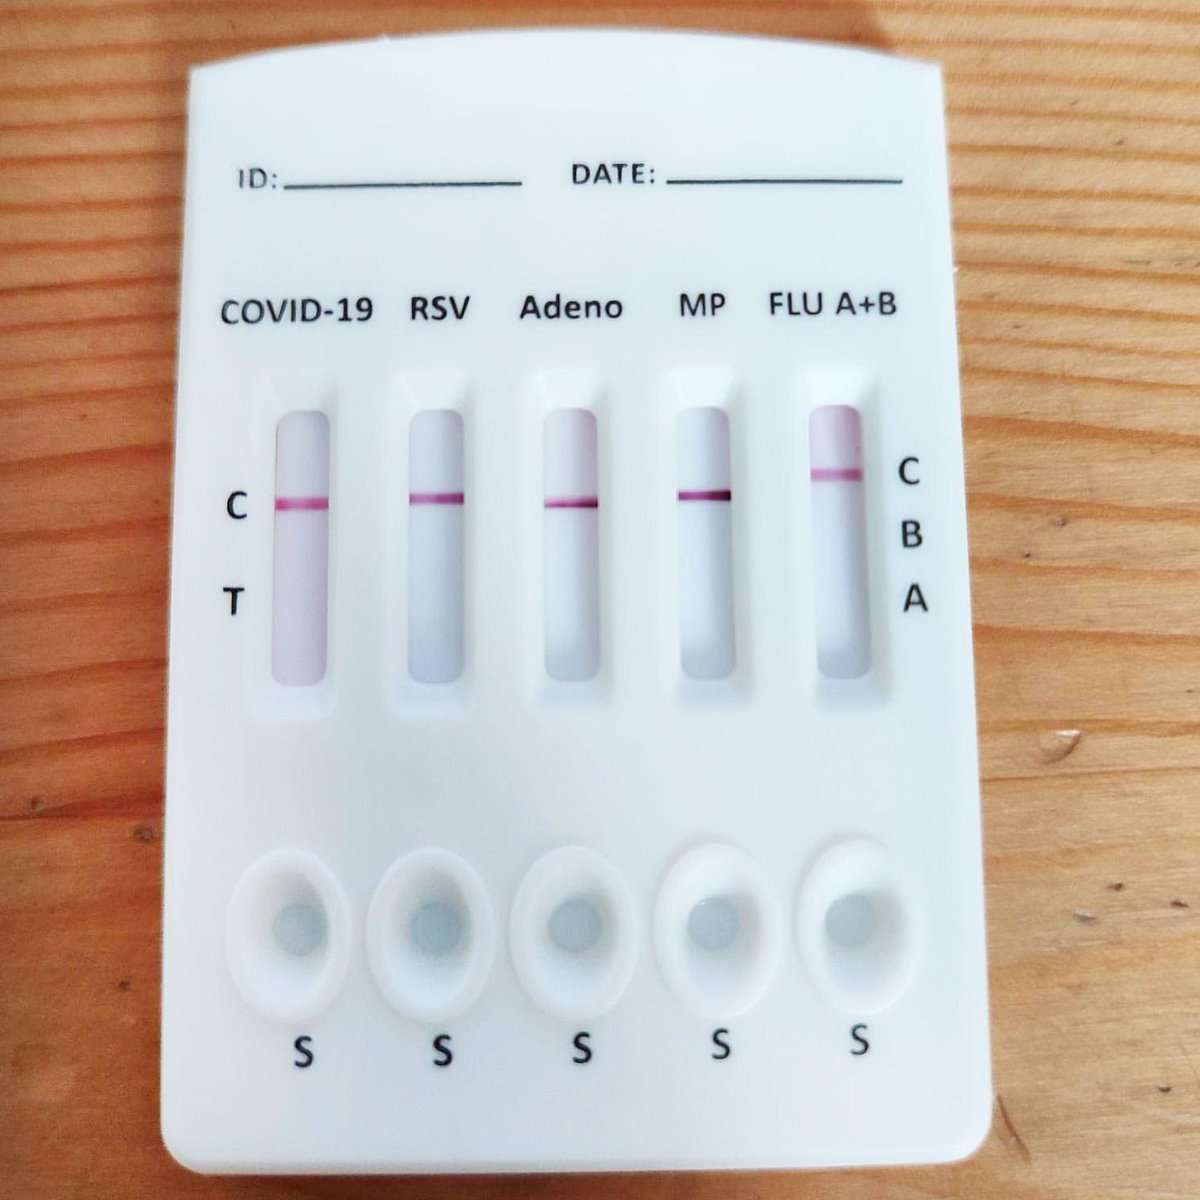 @singingsox It all starts with simple diagnostics.  Imagine if these were widely available for $1 in pharmacies, as they are in several Asian countries: